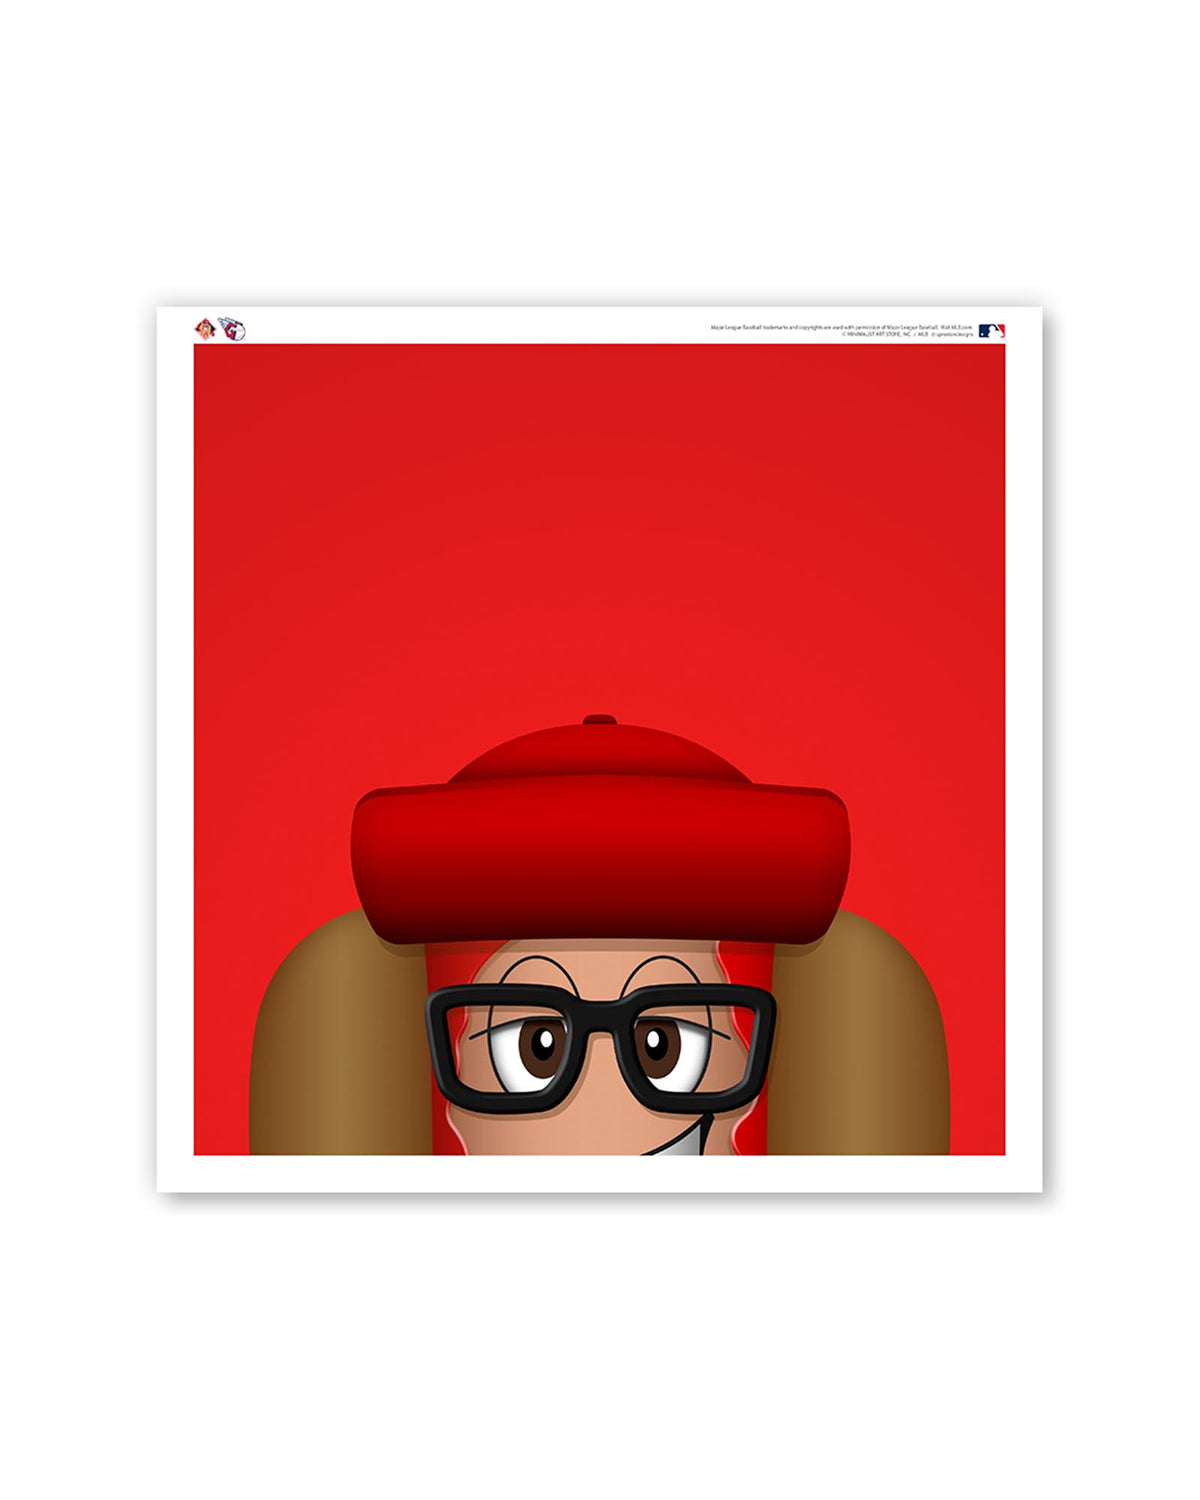 Minimalist Tribe Hot Dogs - Ketchup Square Poster Print